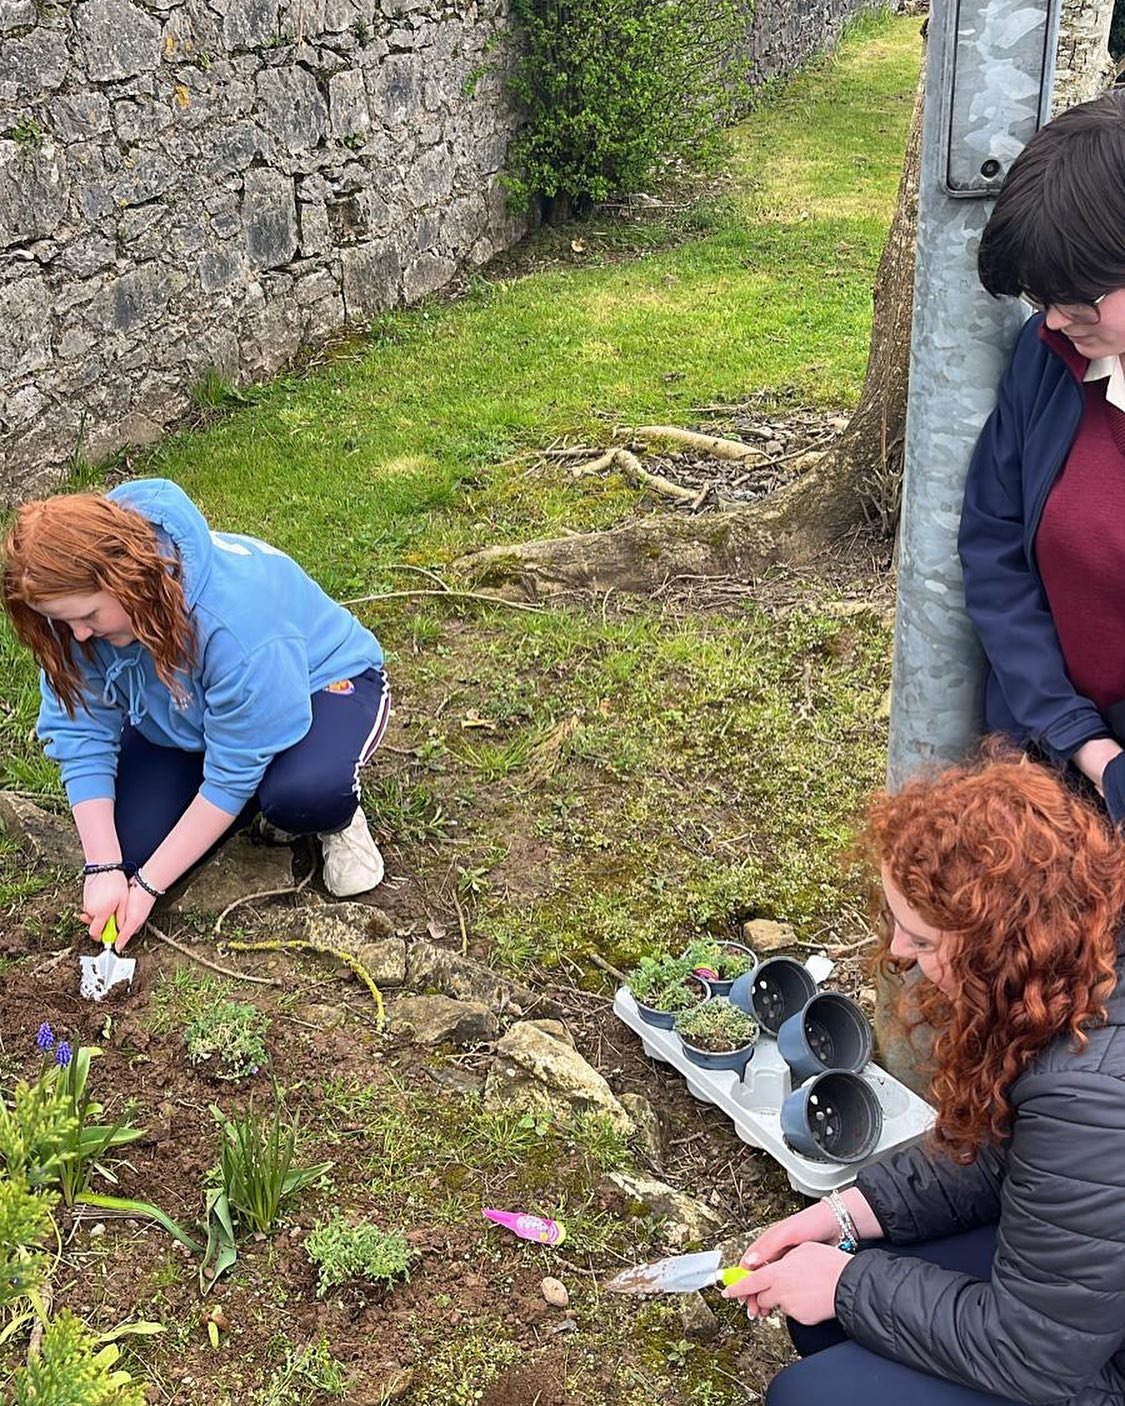 GREEN FINGERS 🌱🌻🌺🌸Today we got our first real feel of Spring in PRES, and what better way to celebrate than to plant some lovely lavender plants in the sunshine. Well done to Mikala Coleman, Ellen Cashman and Aoife Luddy for bringing some colour 